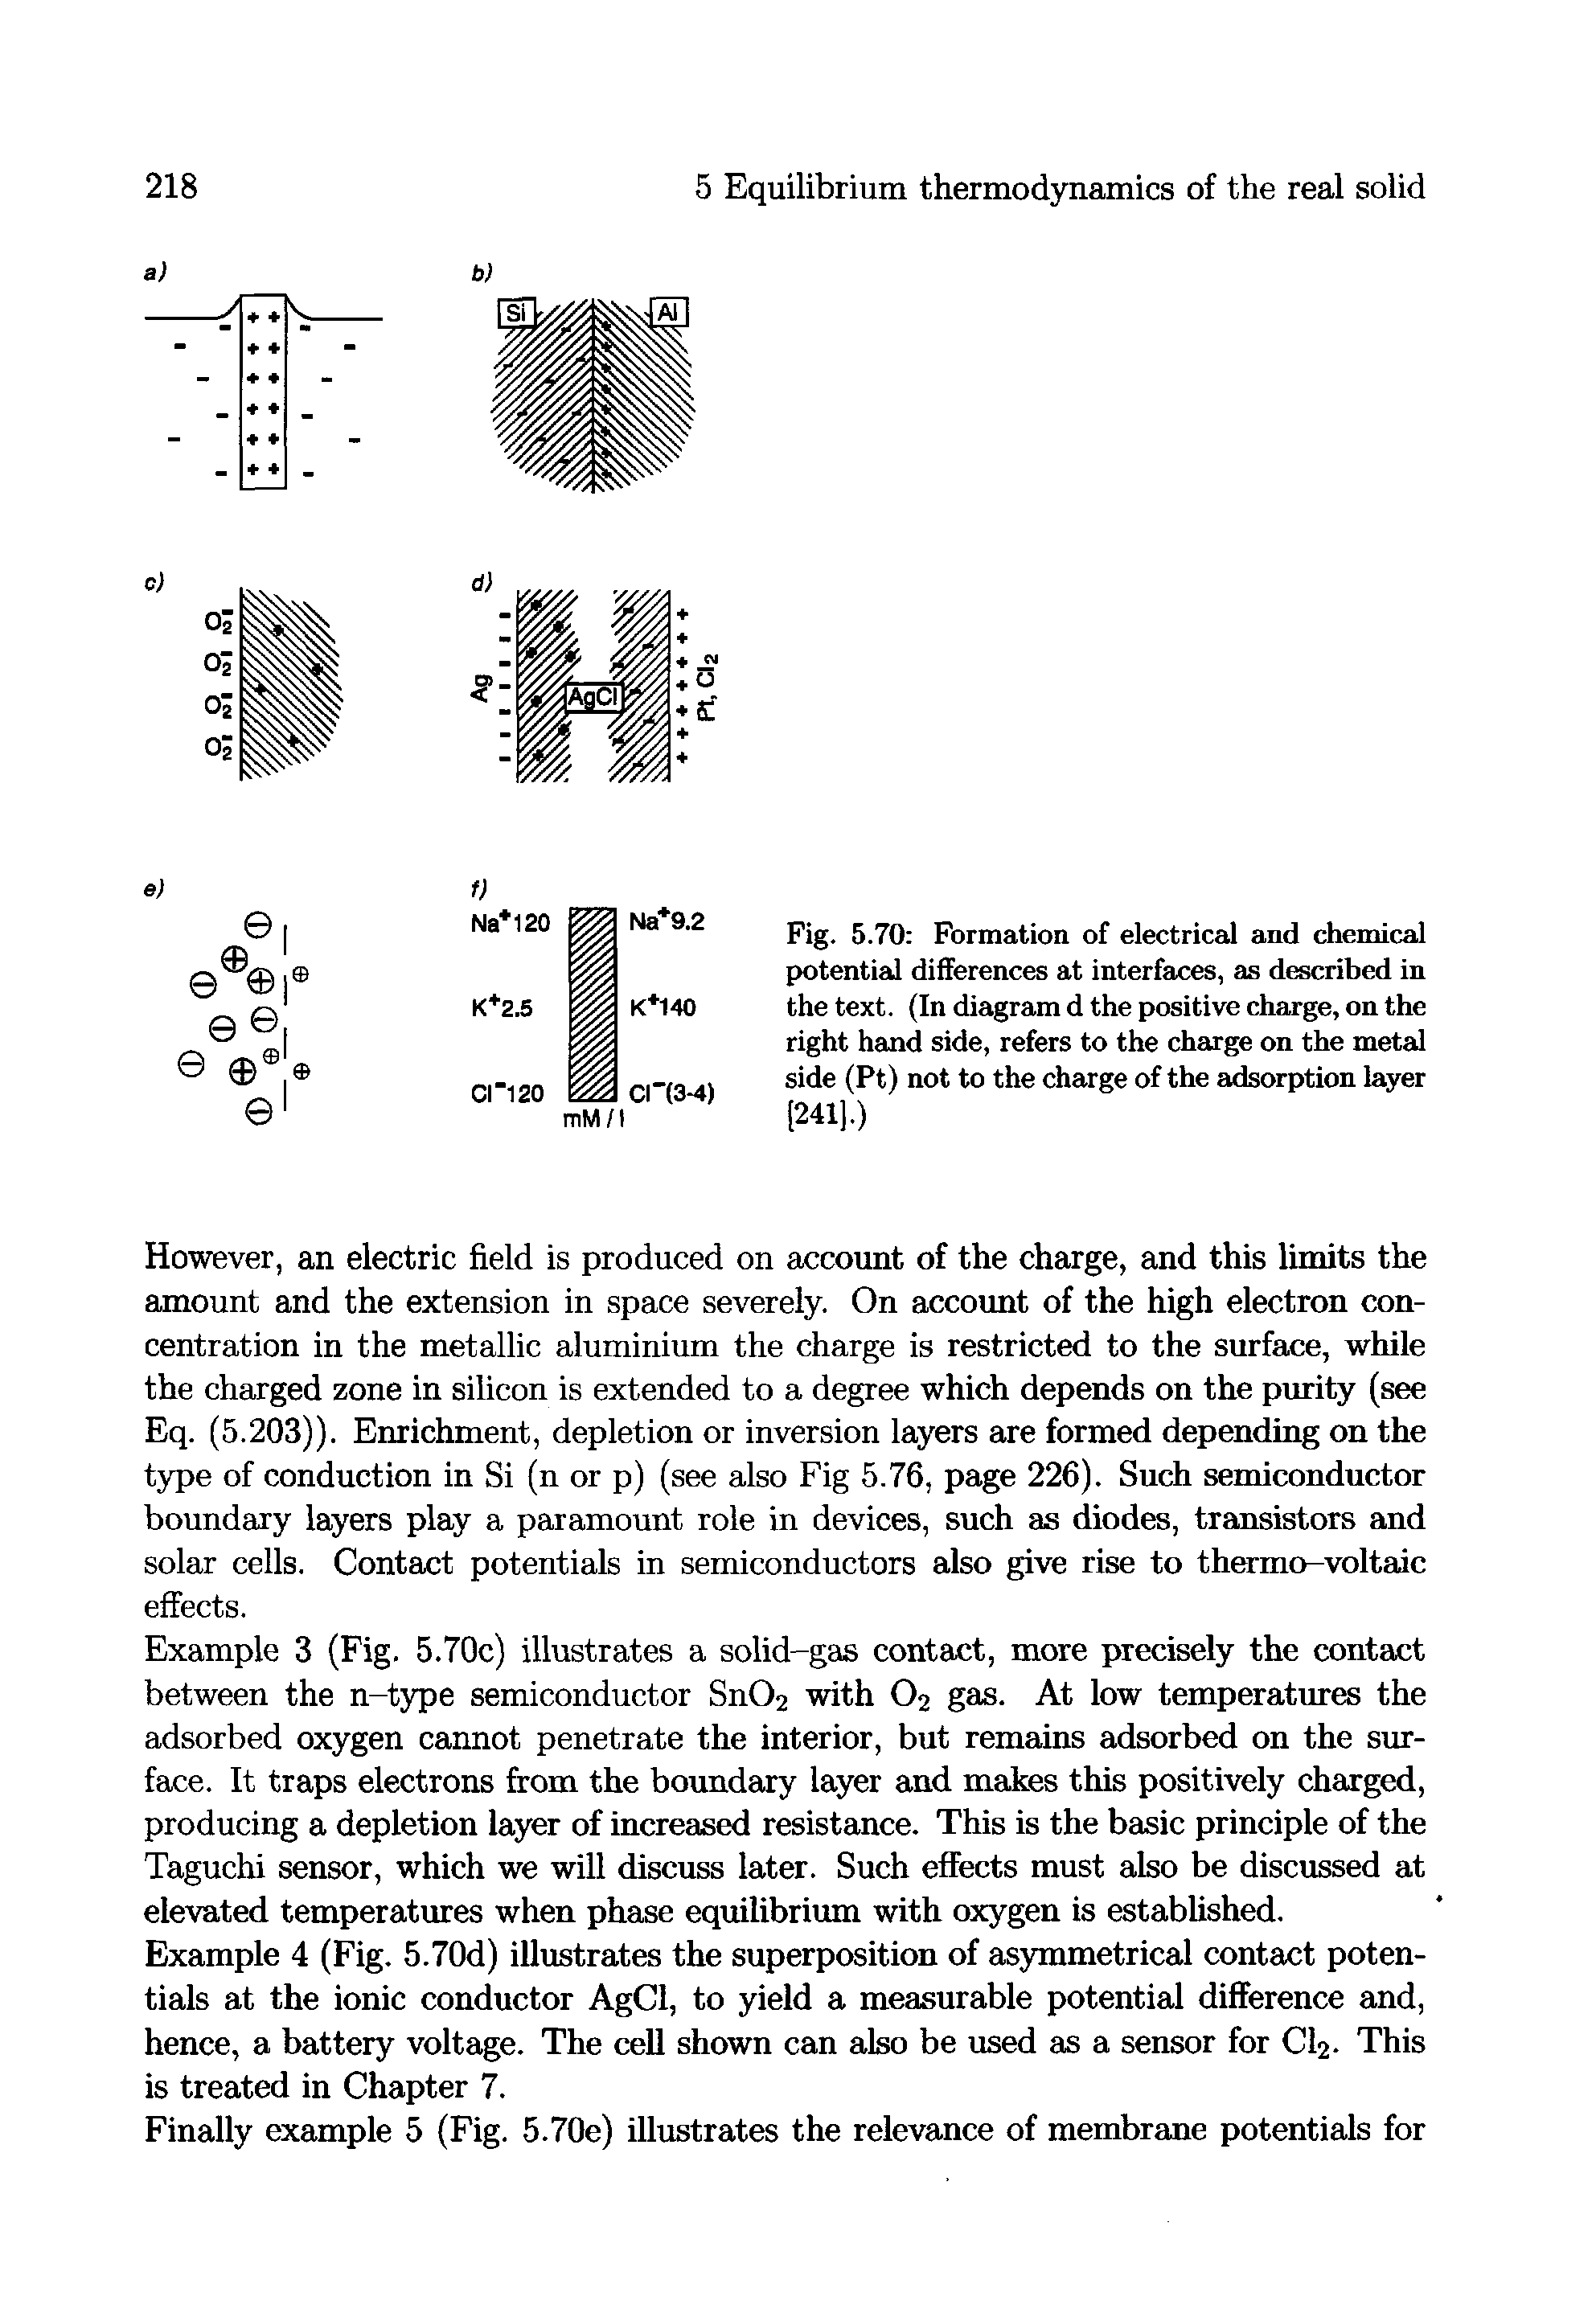 Fig. 5.70 Formation of electriceil and chemical potential differences at interfaces, as described in the text. (In diagram d the positive charge, on the right hand side, refers to the charge on the metal side (Pt) not to the charge of the adsorption layer (241).)...